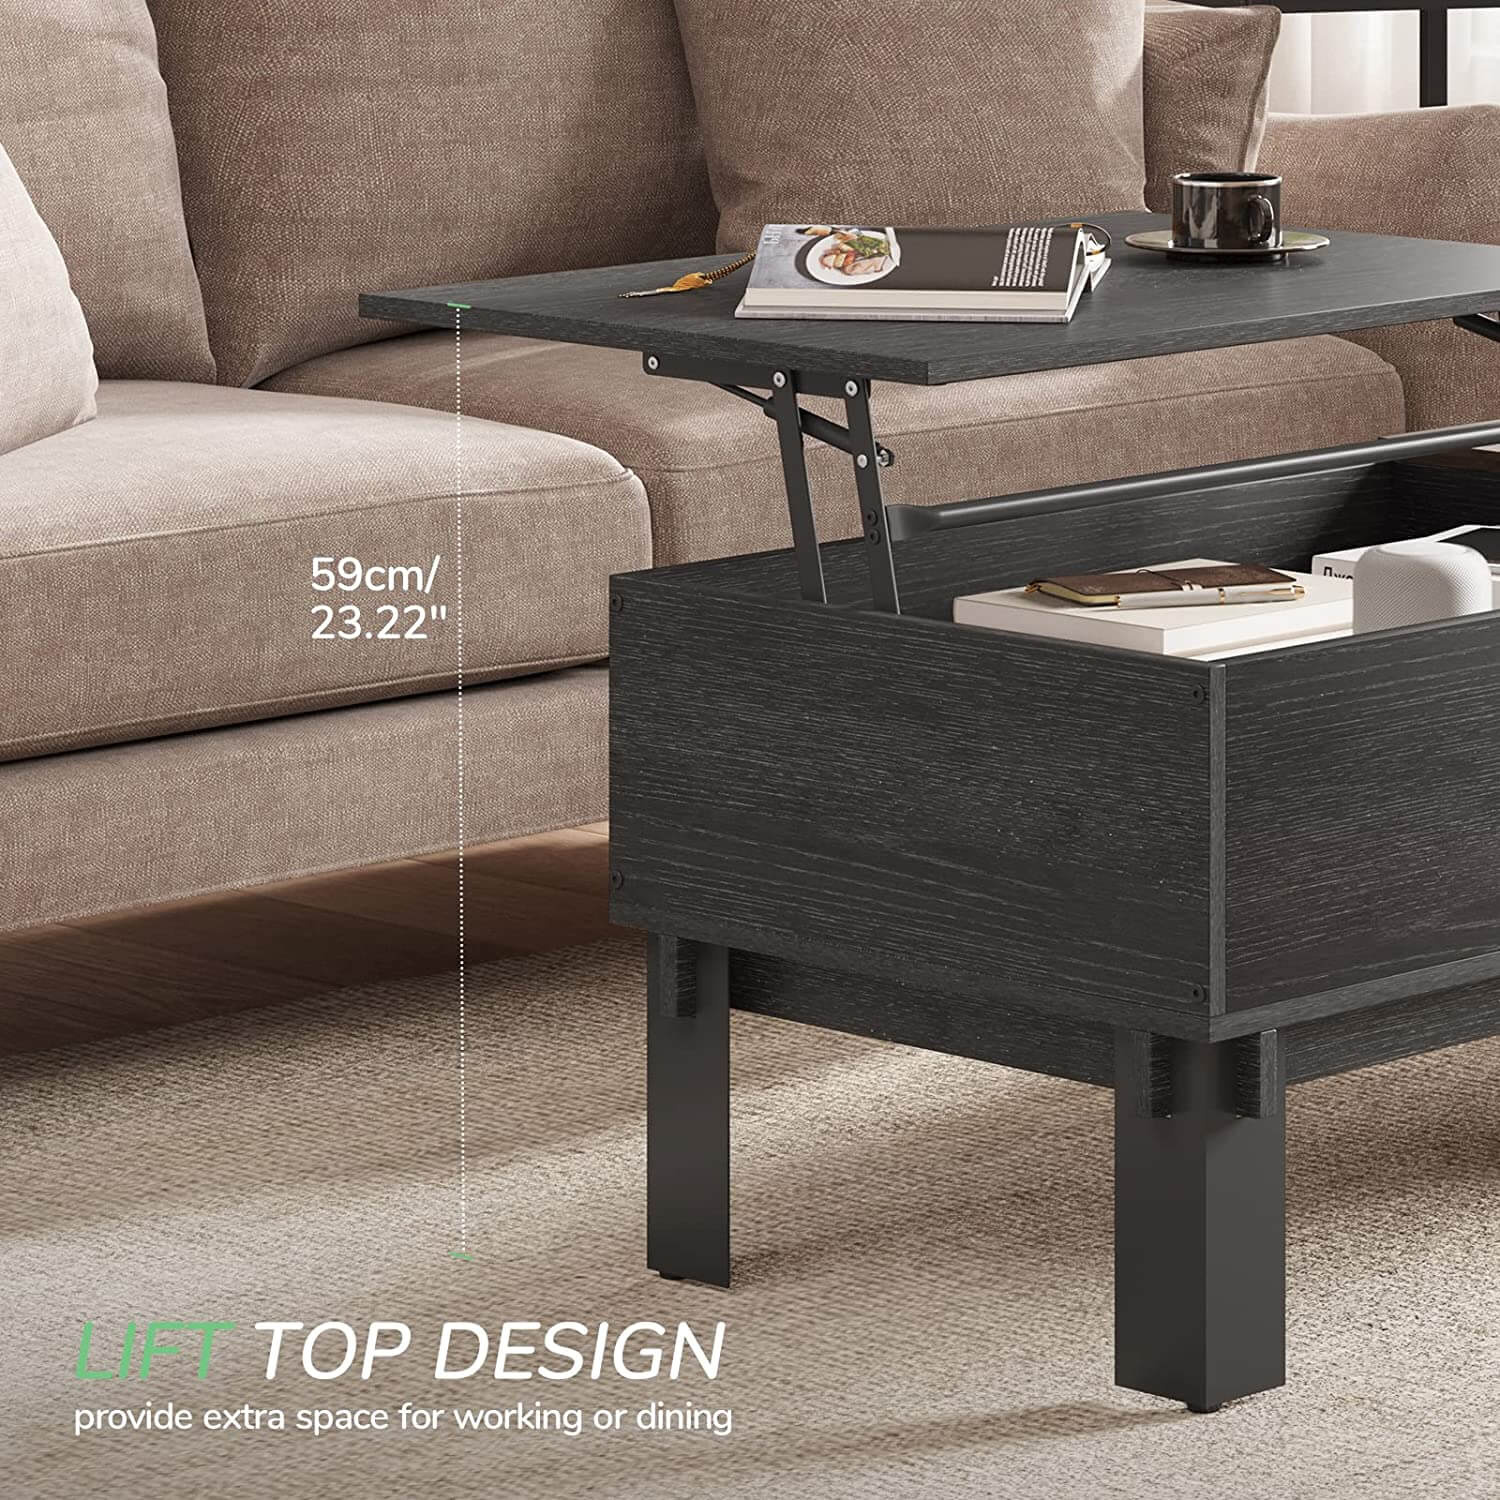 Pop-up Coffee Table with drawers